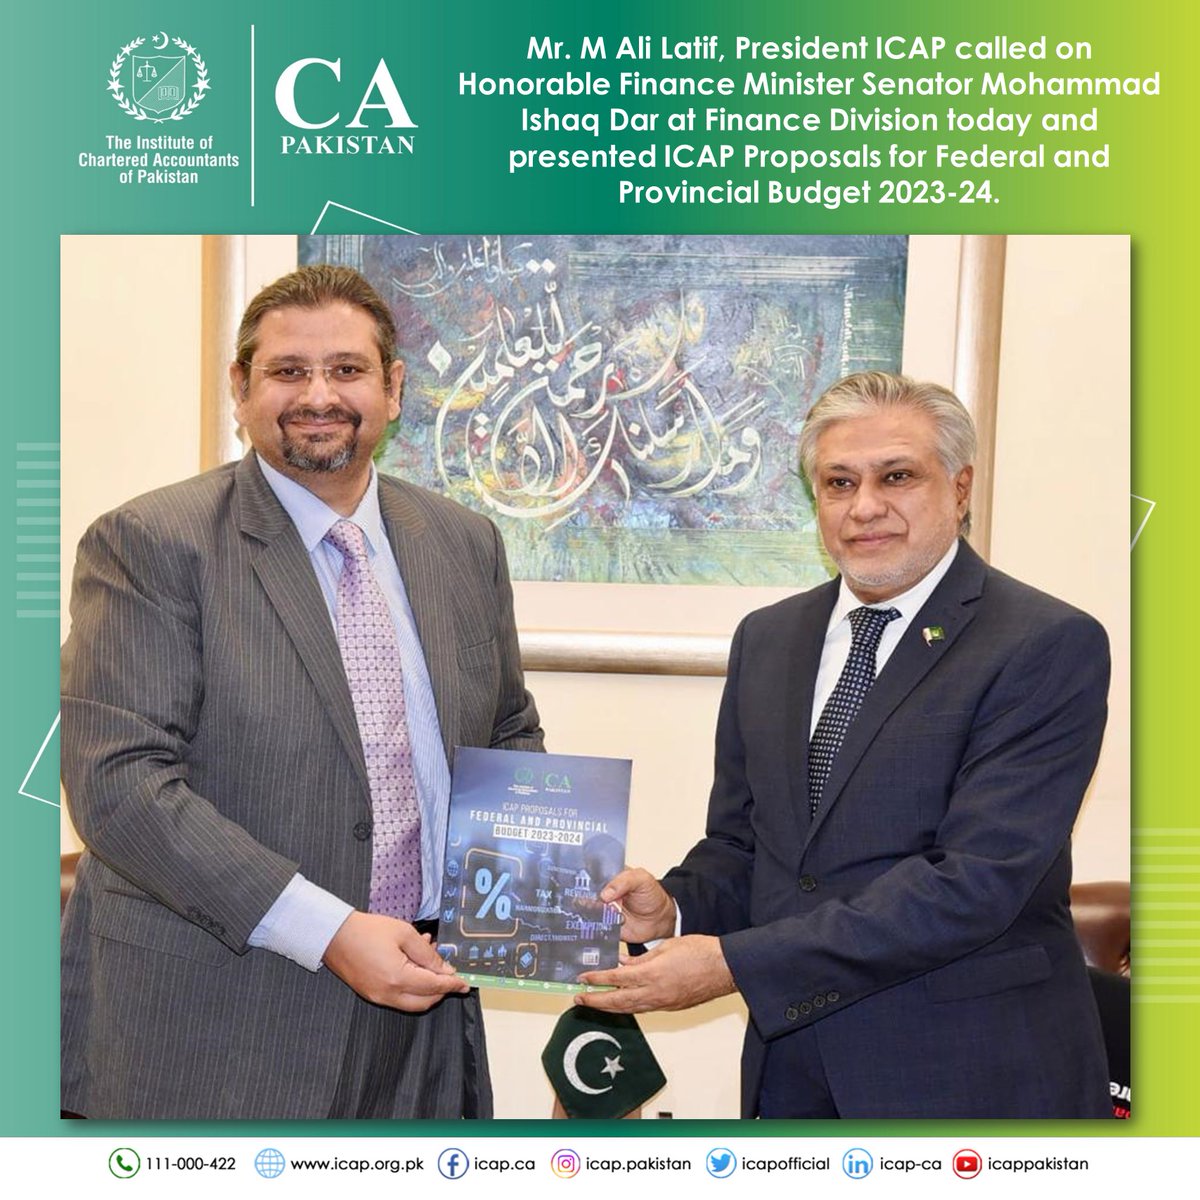 Mr. M Ali Latif, President ICAP called on Honorable Finance Minister Senator Mohammad Ishaq Dar at Finance Division today and presented ICAP Proposals for Federal and Provincial Budget 2023-24.
#finance #budget #finances #federalbudget2023 #provincialbudget @FinMinistryPak